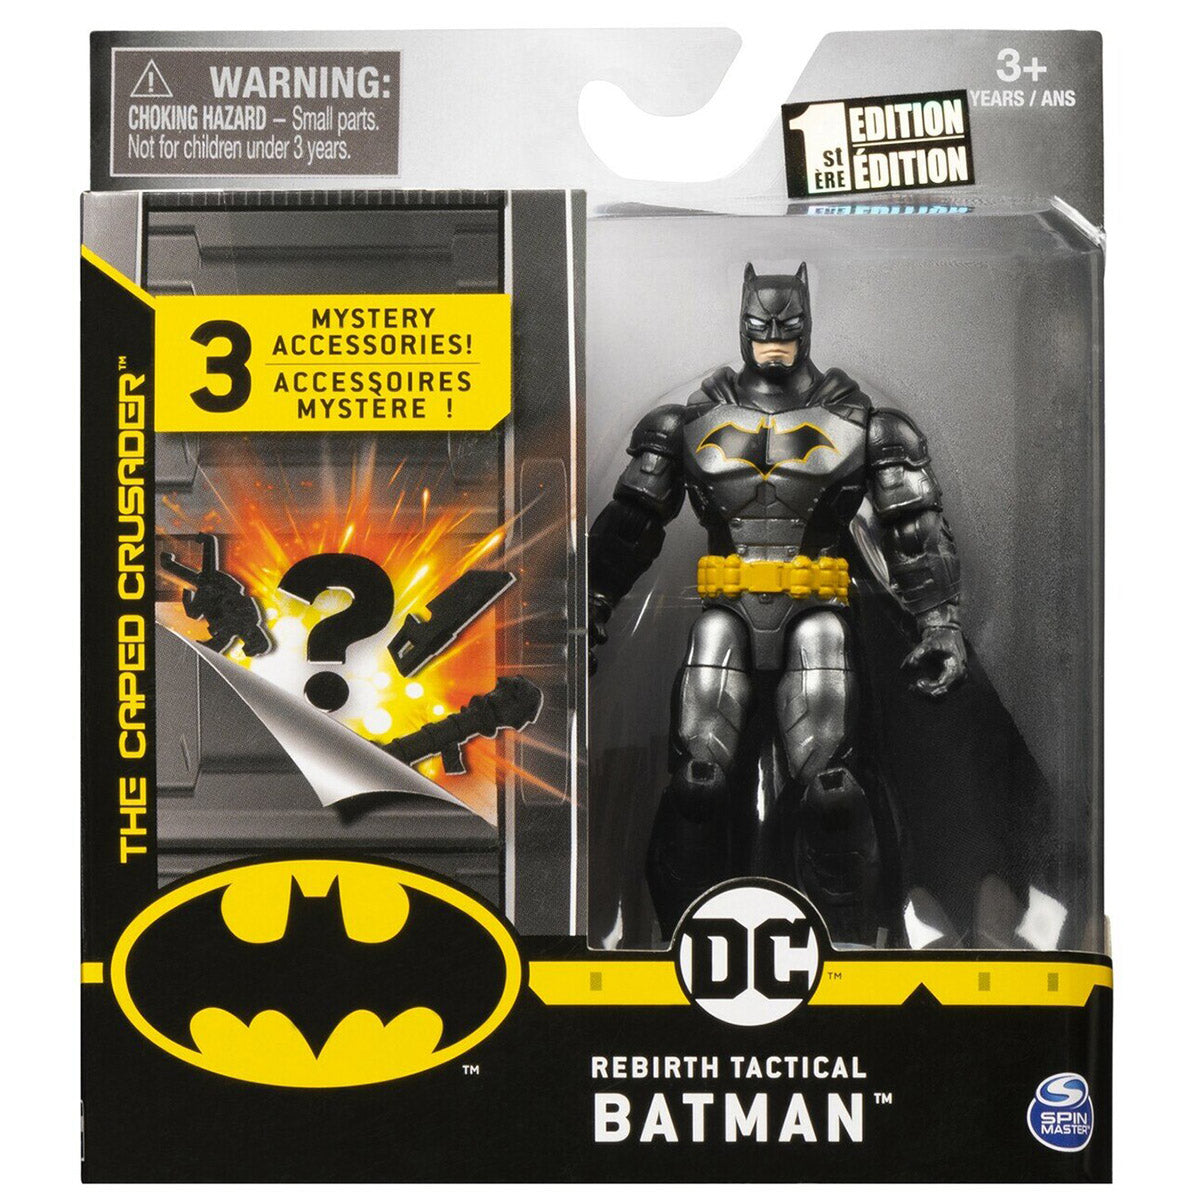 DC Creature Chaos Rebirth Tactical Batman with Accessories